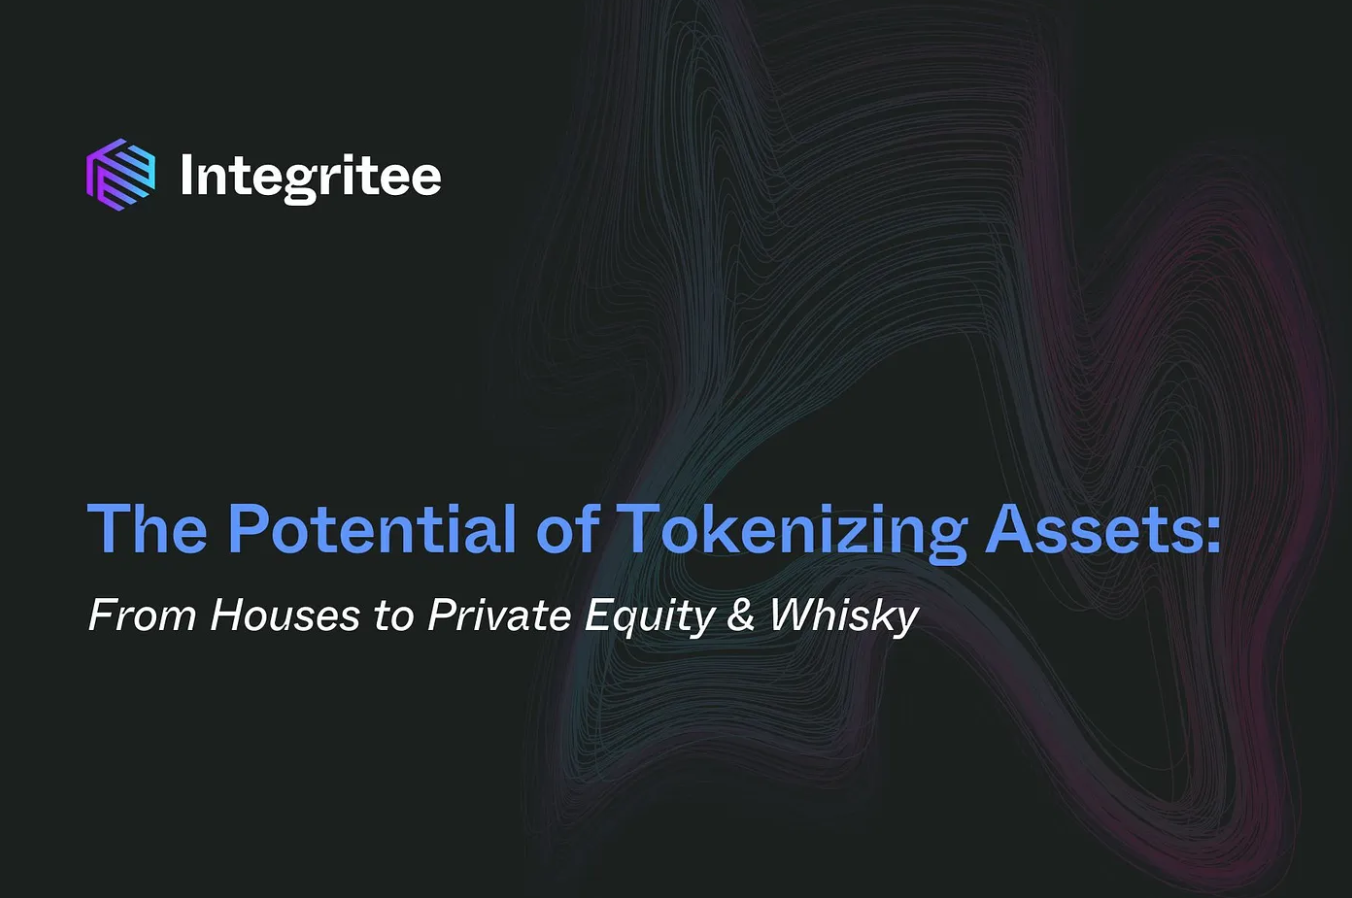 The Potential of Tokenizing Assets: From Houses to Private Equity & Whisky